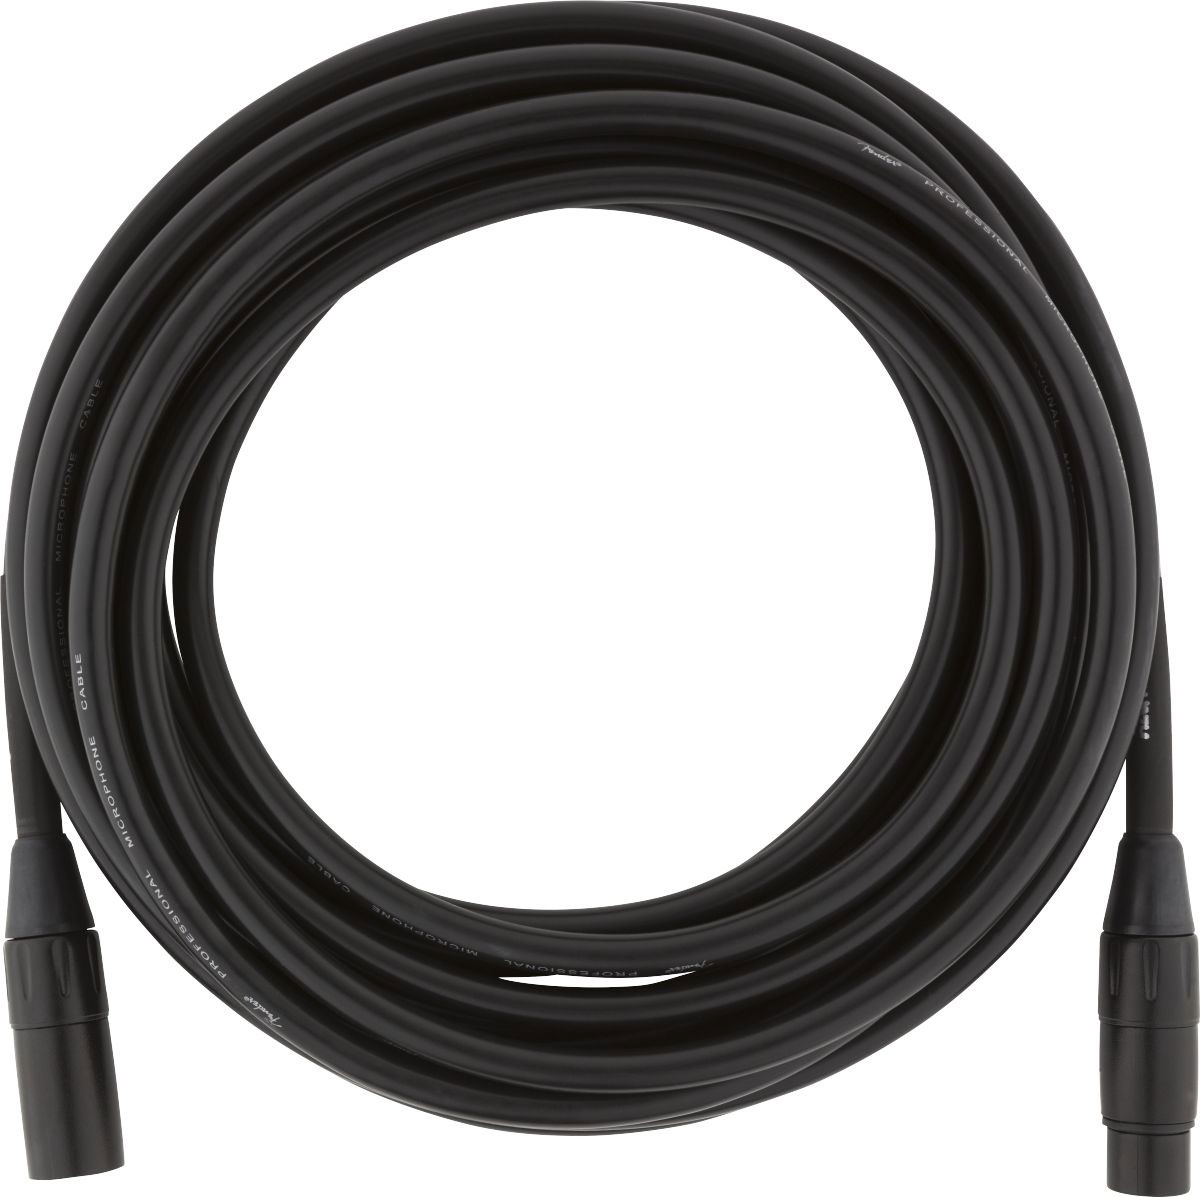 PROFESSIONAL MICROPHONE CABLE, 25', BLACK